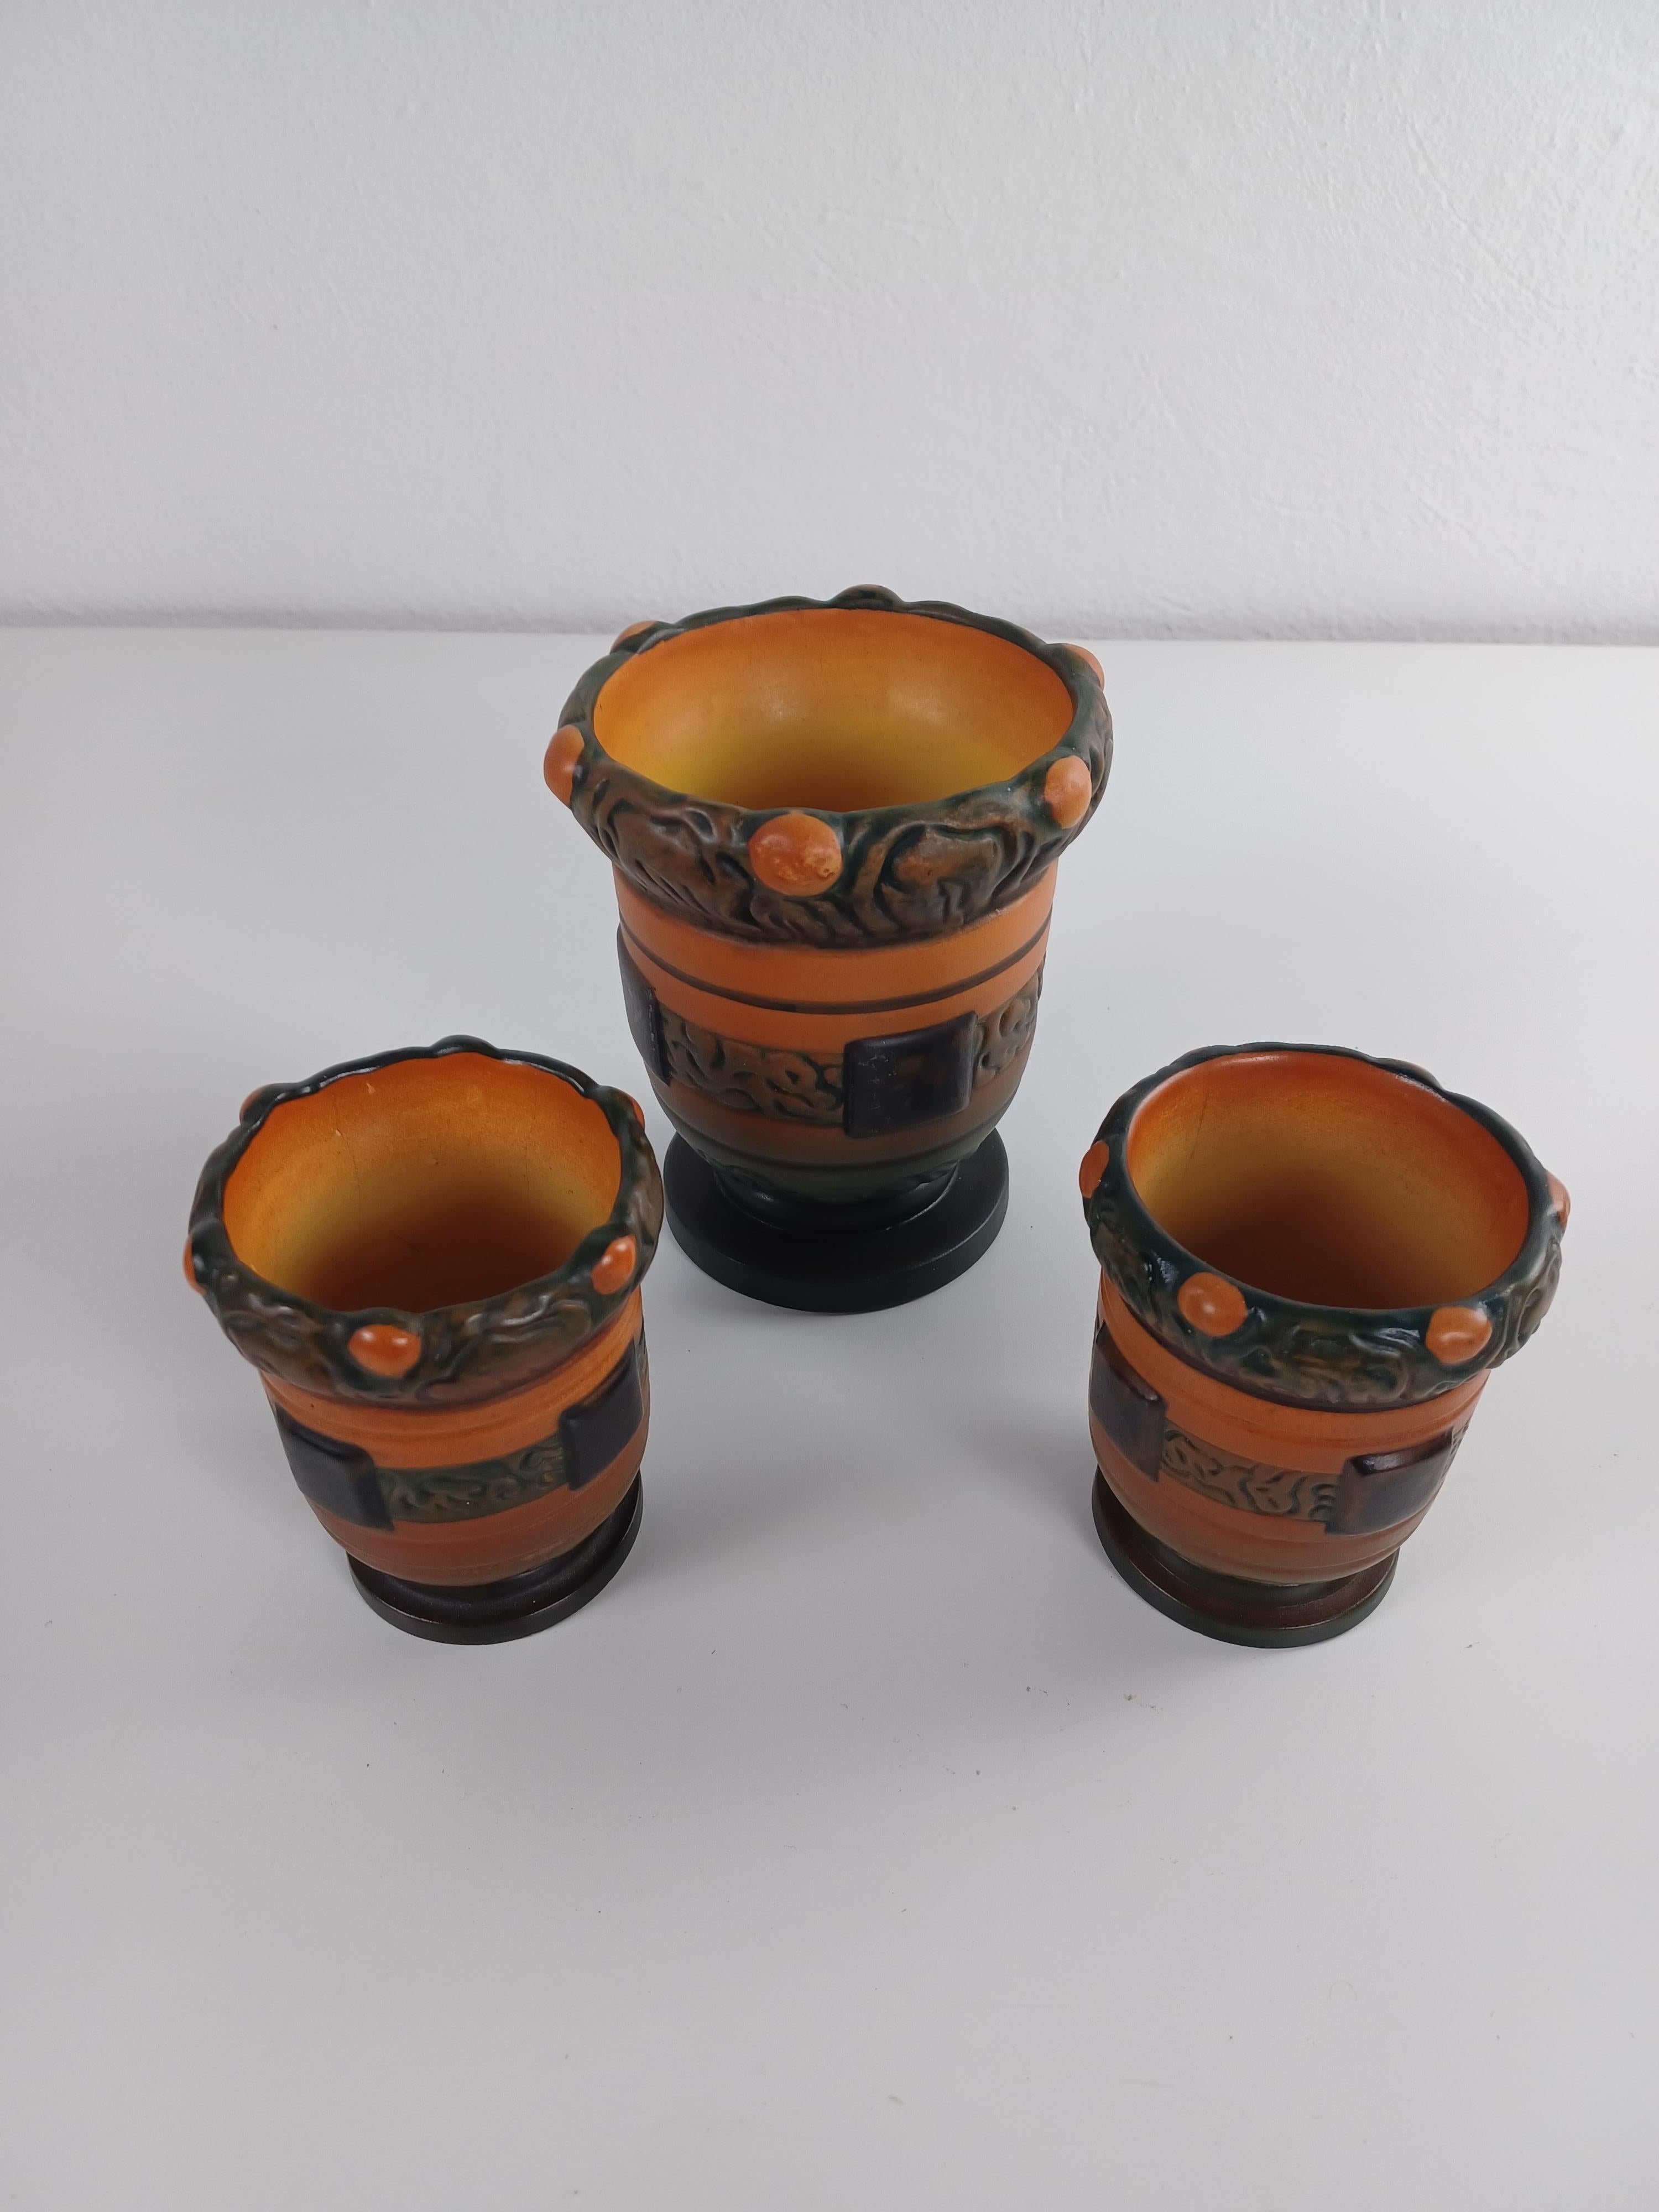 Hand-Crafted 1900's Danish Thorvald Bindesboell Three Art Nouveau Vases by P. Ipsens Enke For Sale